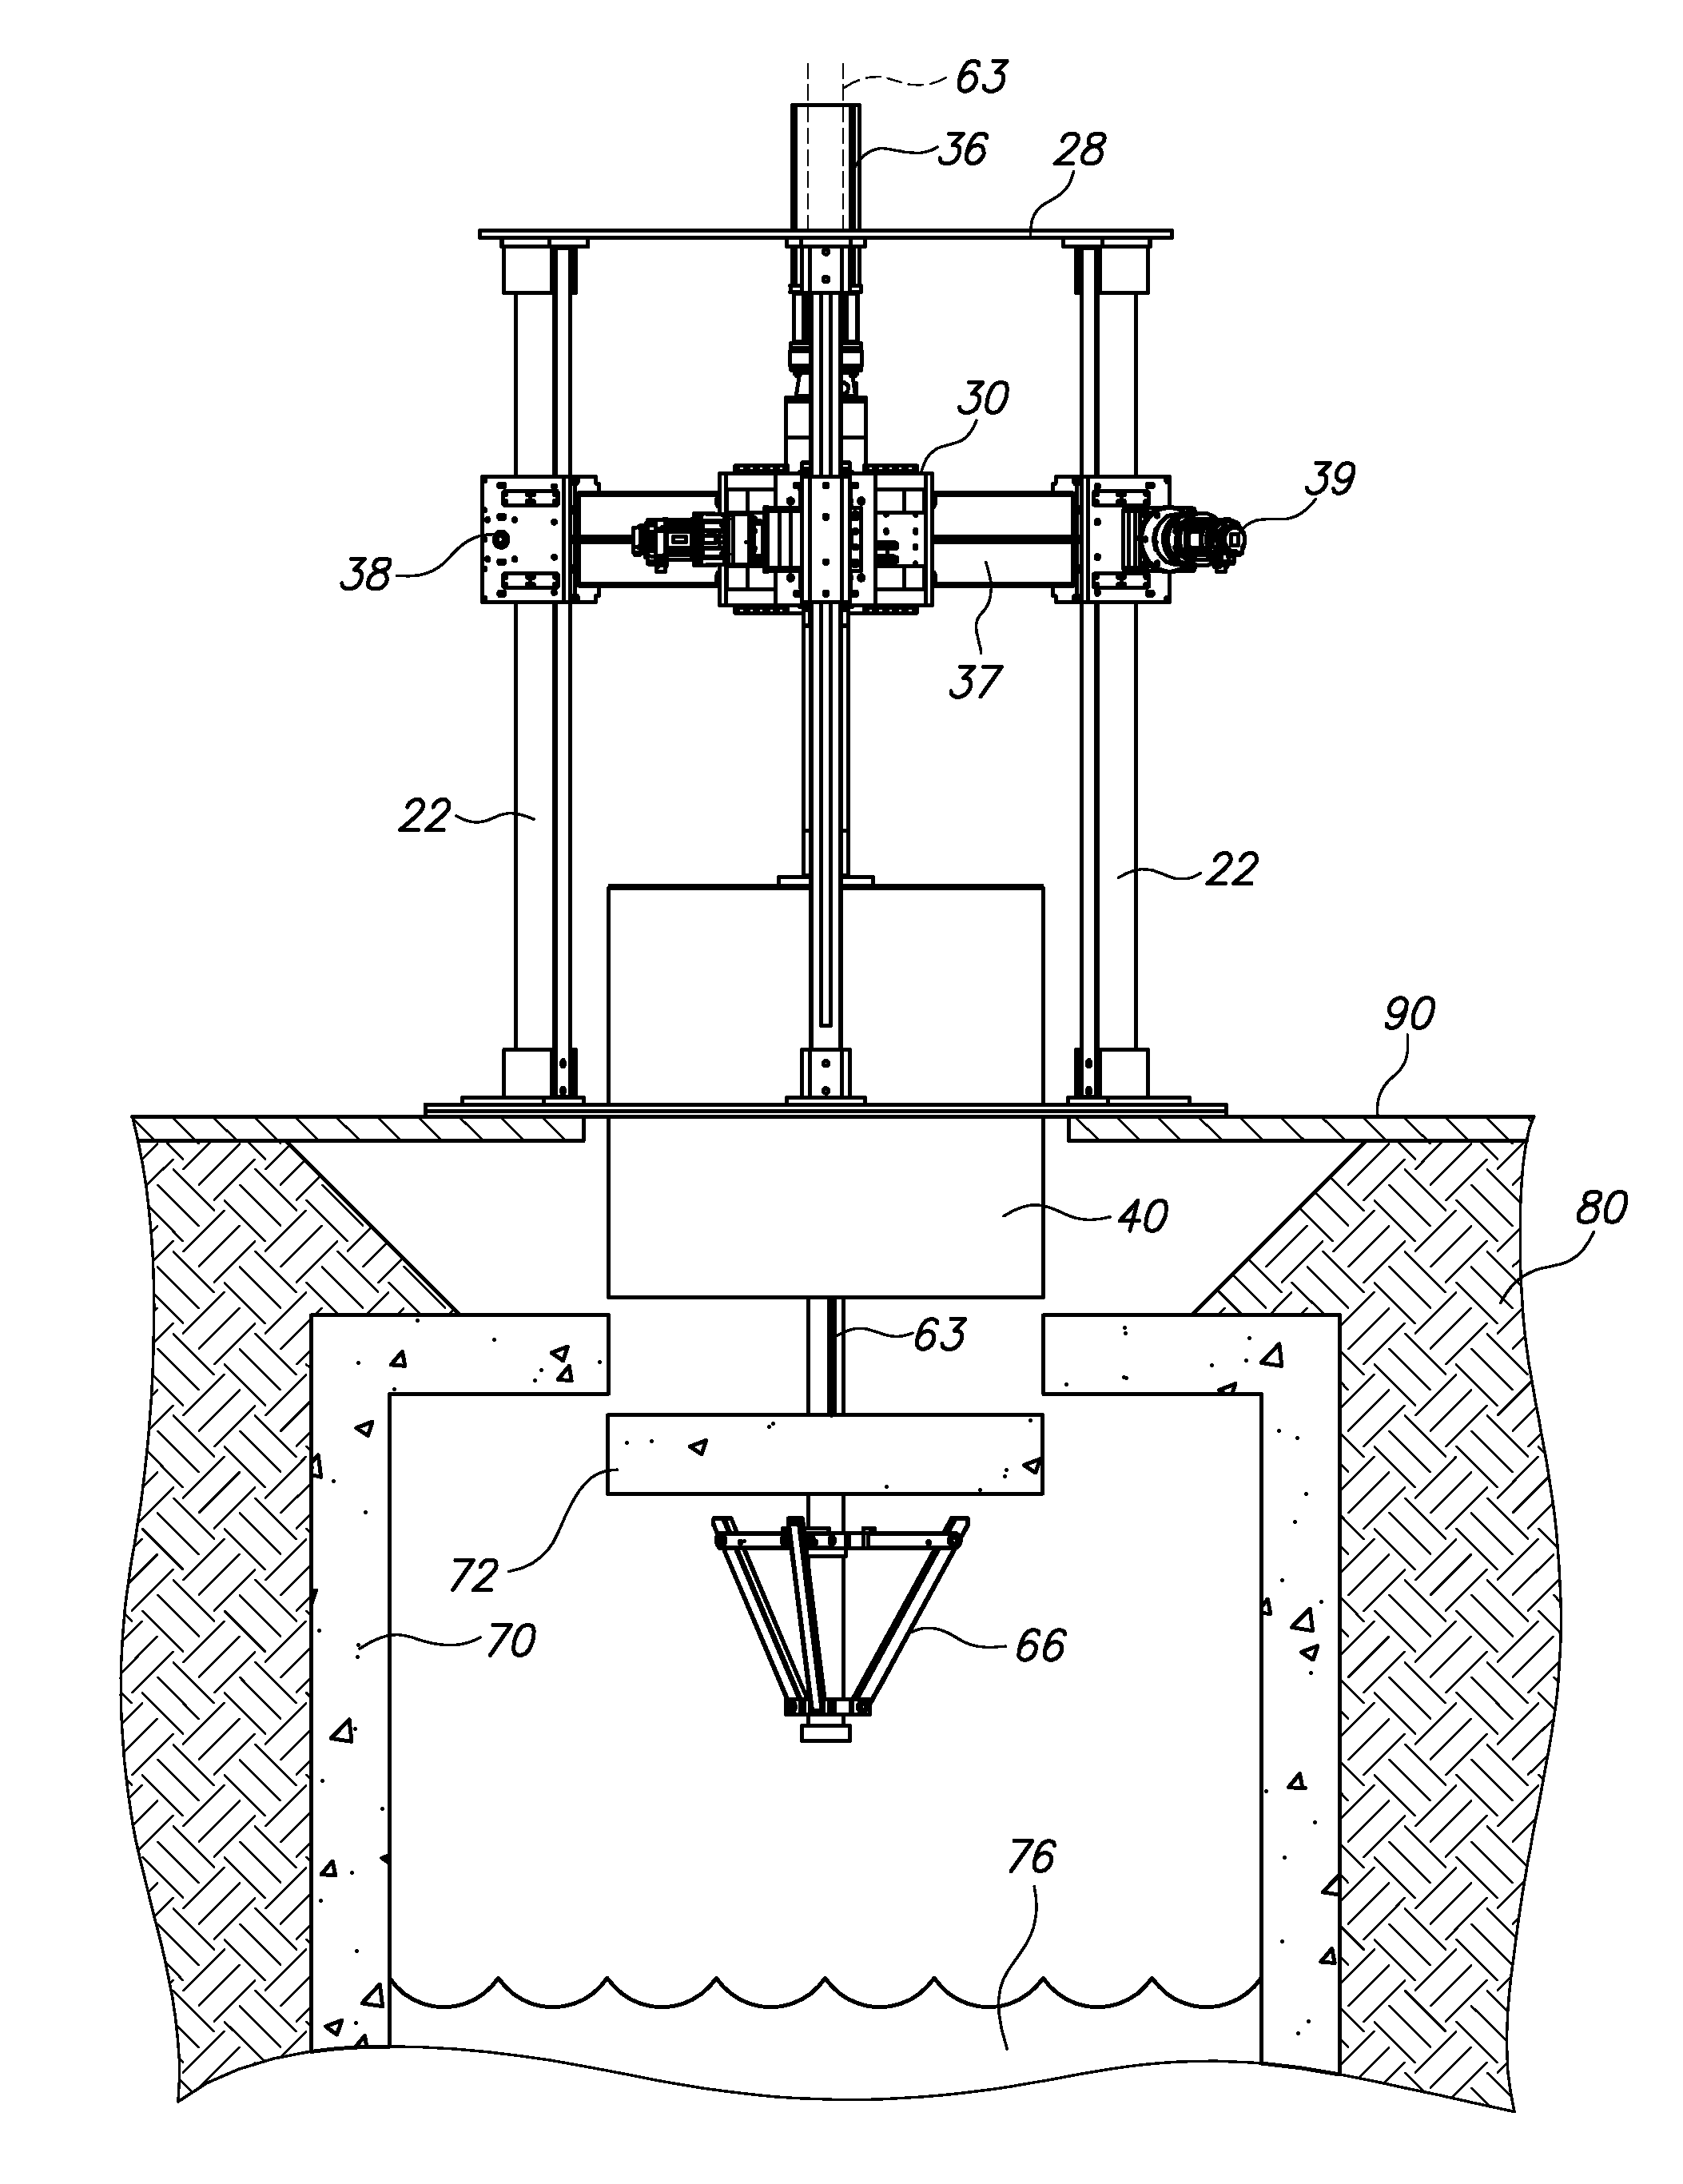 Automated core drilling device capable of mating with a center-mounted core-catching device